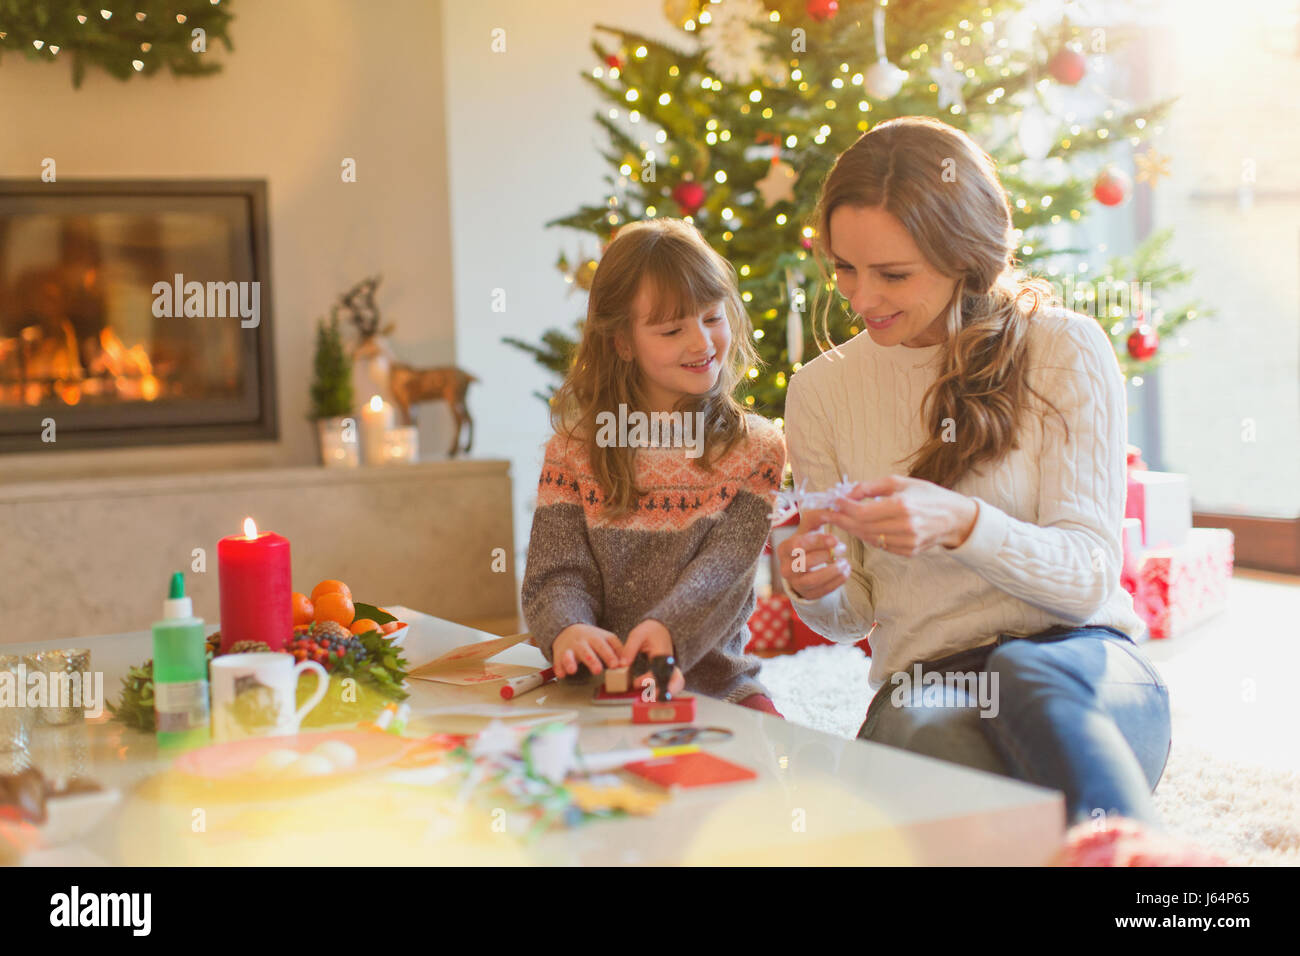 Mother and daughter making Christmas snowflake decorations in living room Stock Photo